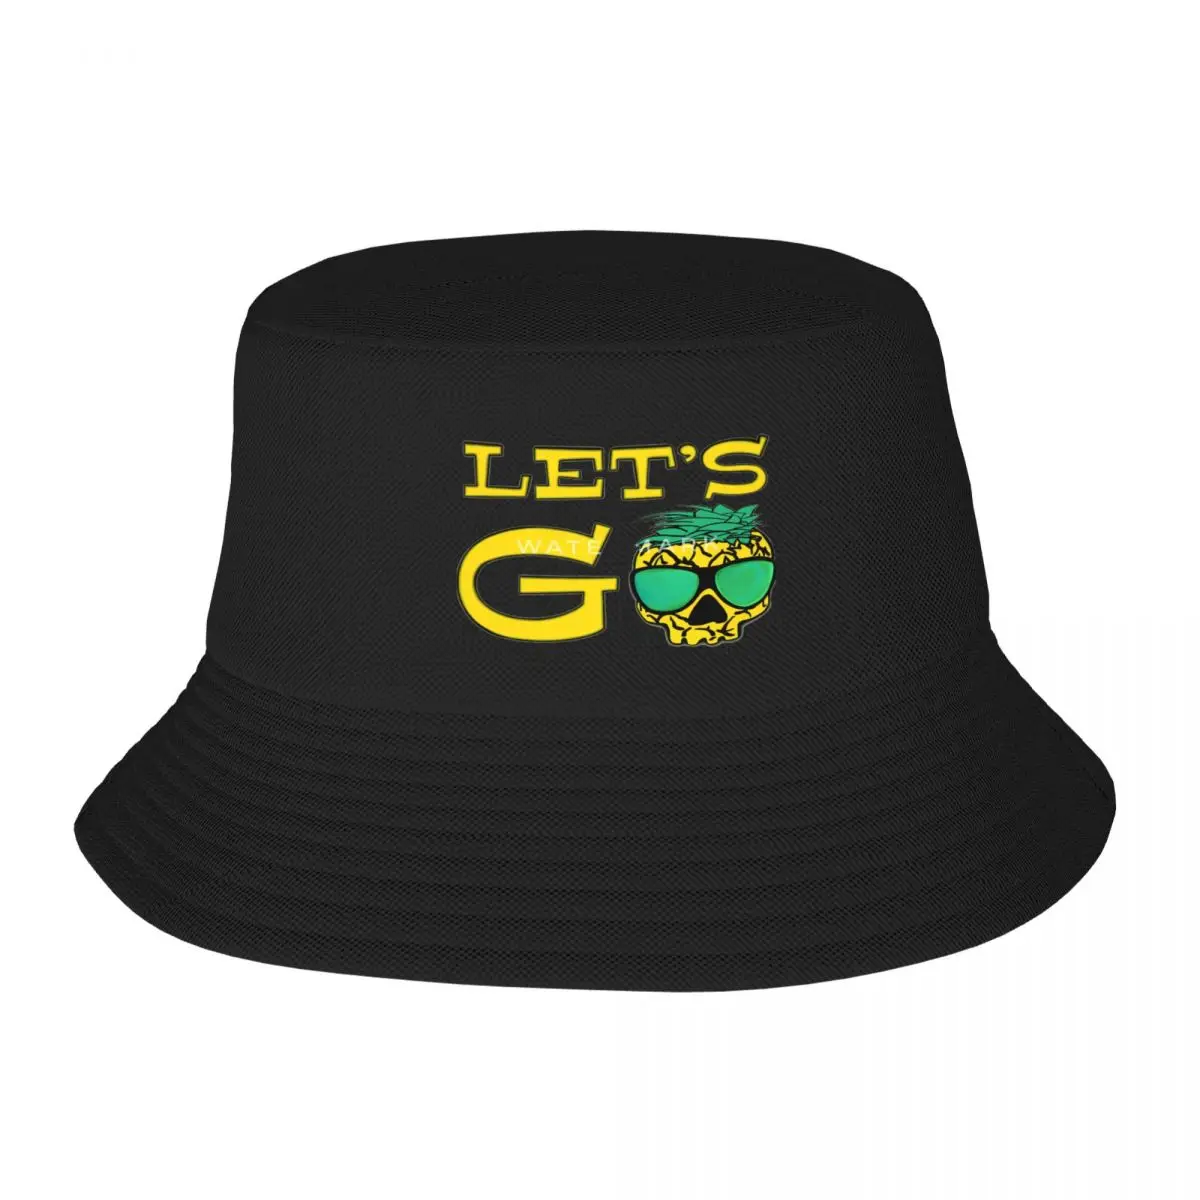 

Lets Go Pineapple Skull - Funny Surfing Quote Fisherman's Hat, Adult Cap Retro Cute Wind Light For Daily Nice Gift